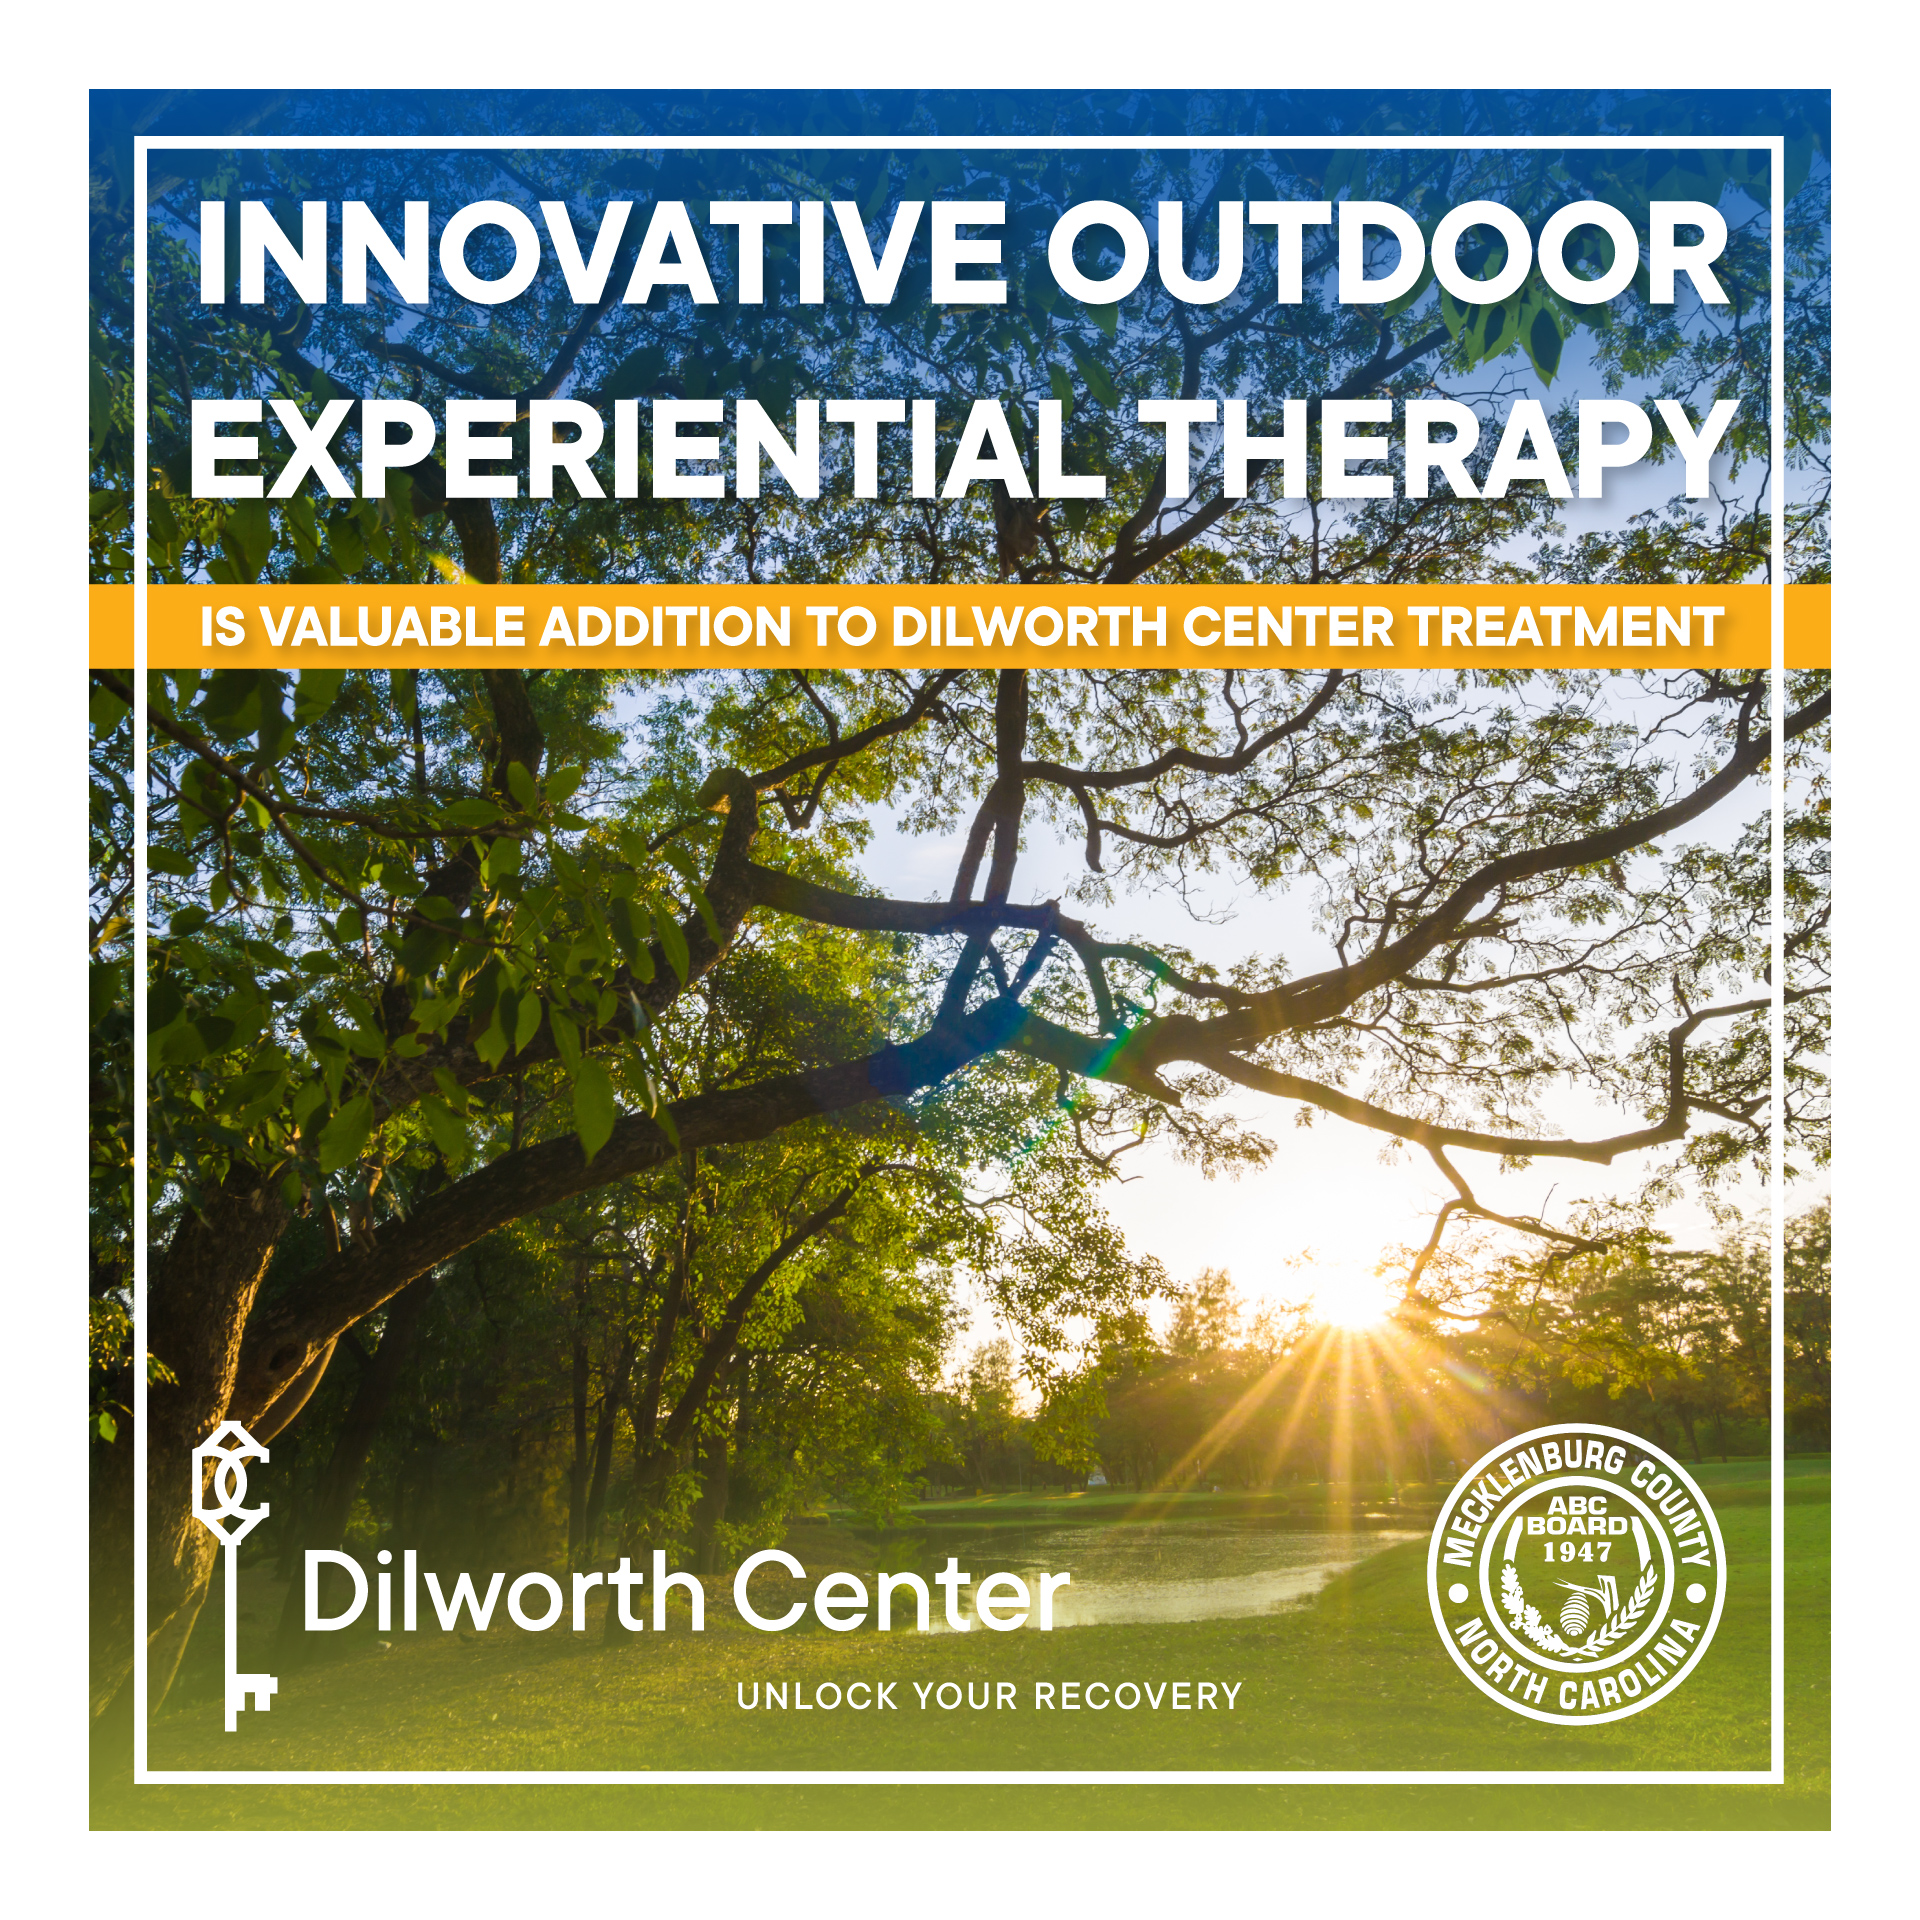 INNOVATIVE OUTDOOR EXPERIENTIAL THERAPY